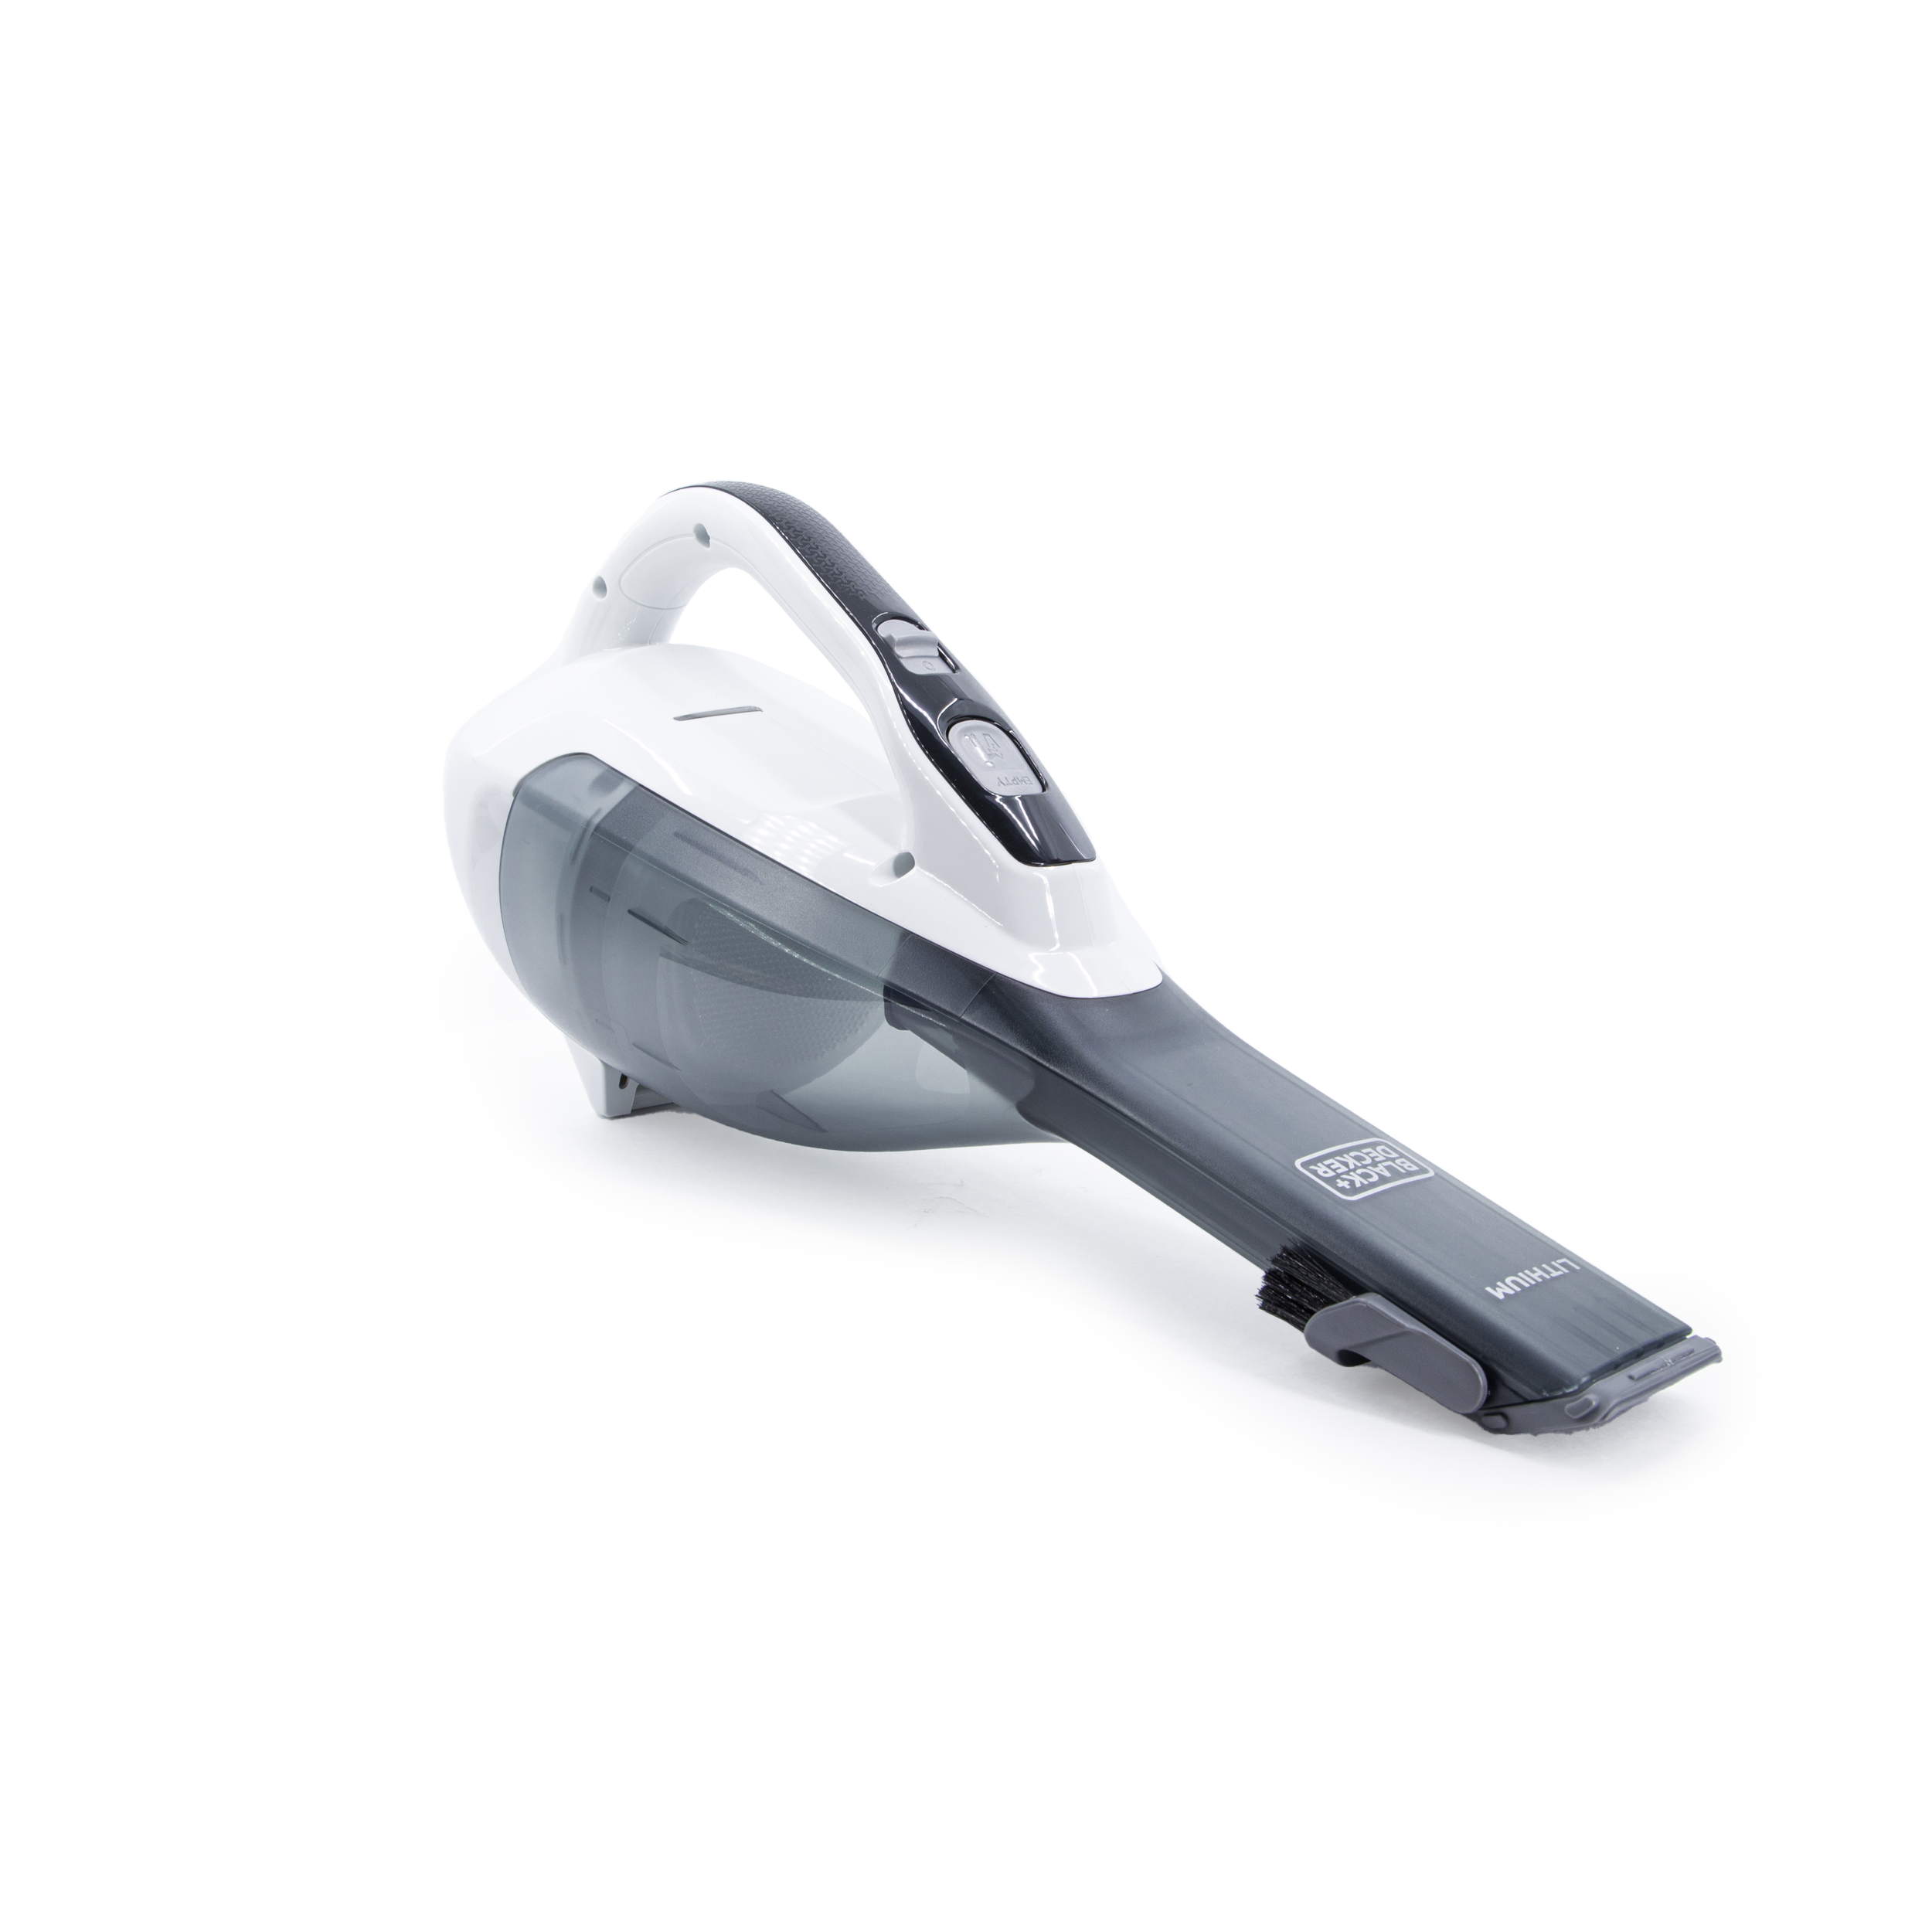 Questions and Answers: Black+Decker Cordless Hand Vac White/Black